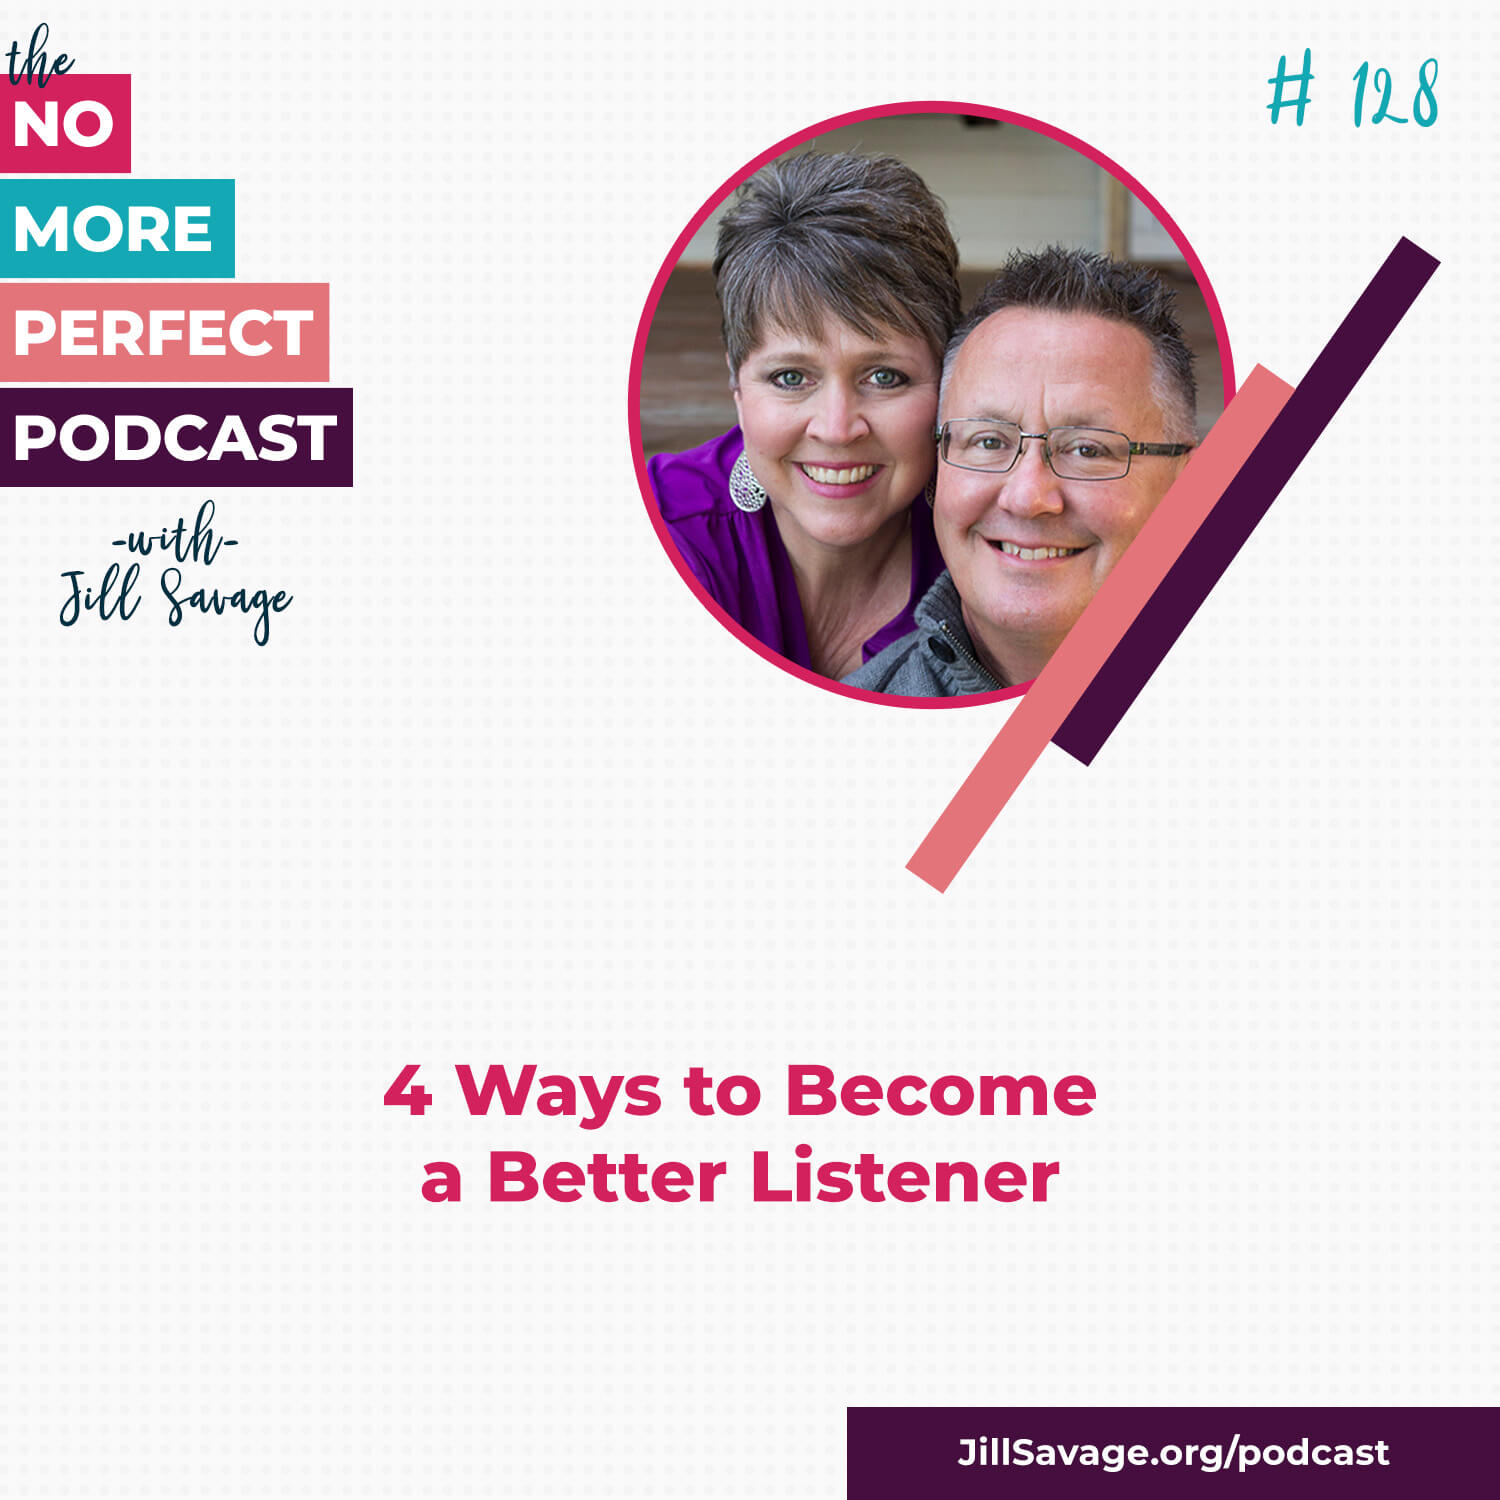 4 Ways to Become a Better Listener | Episode 128